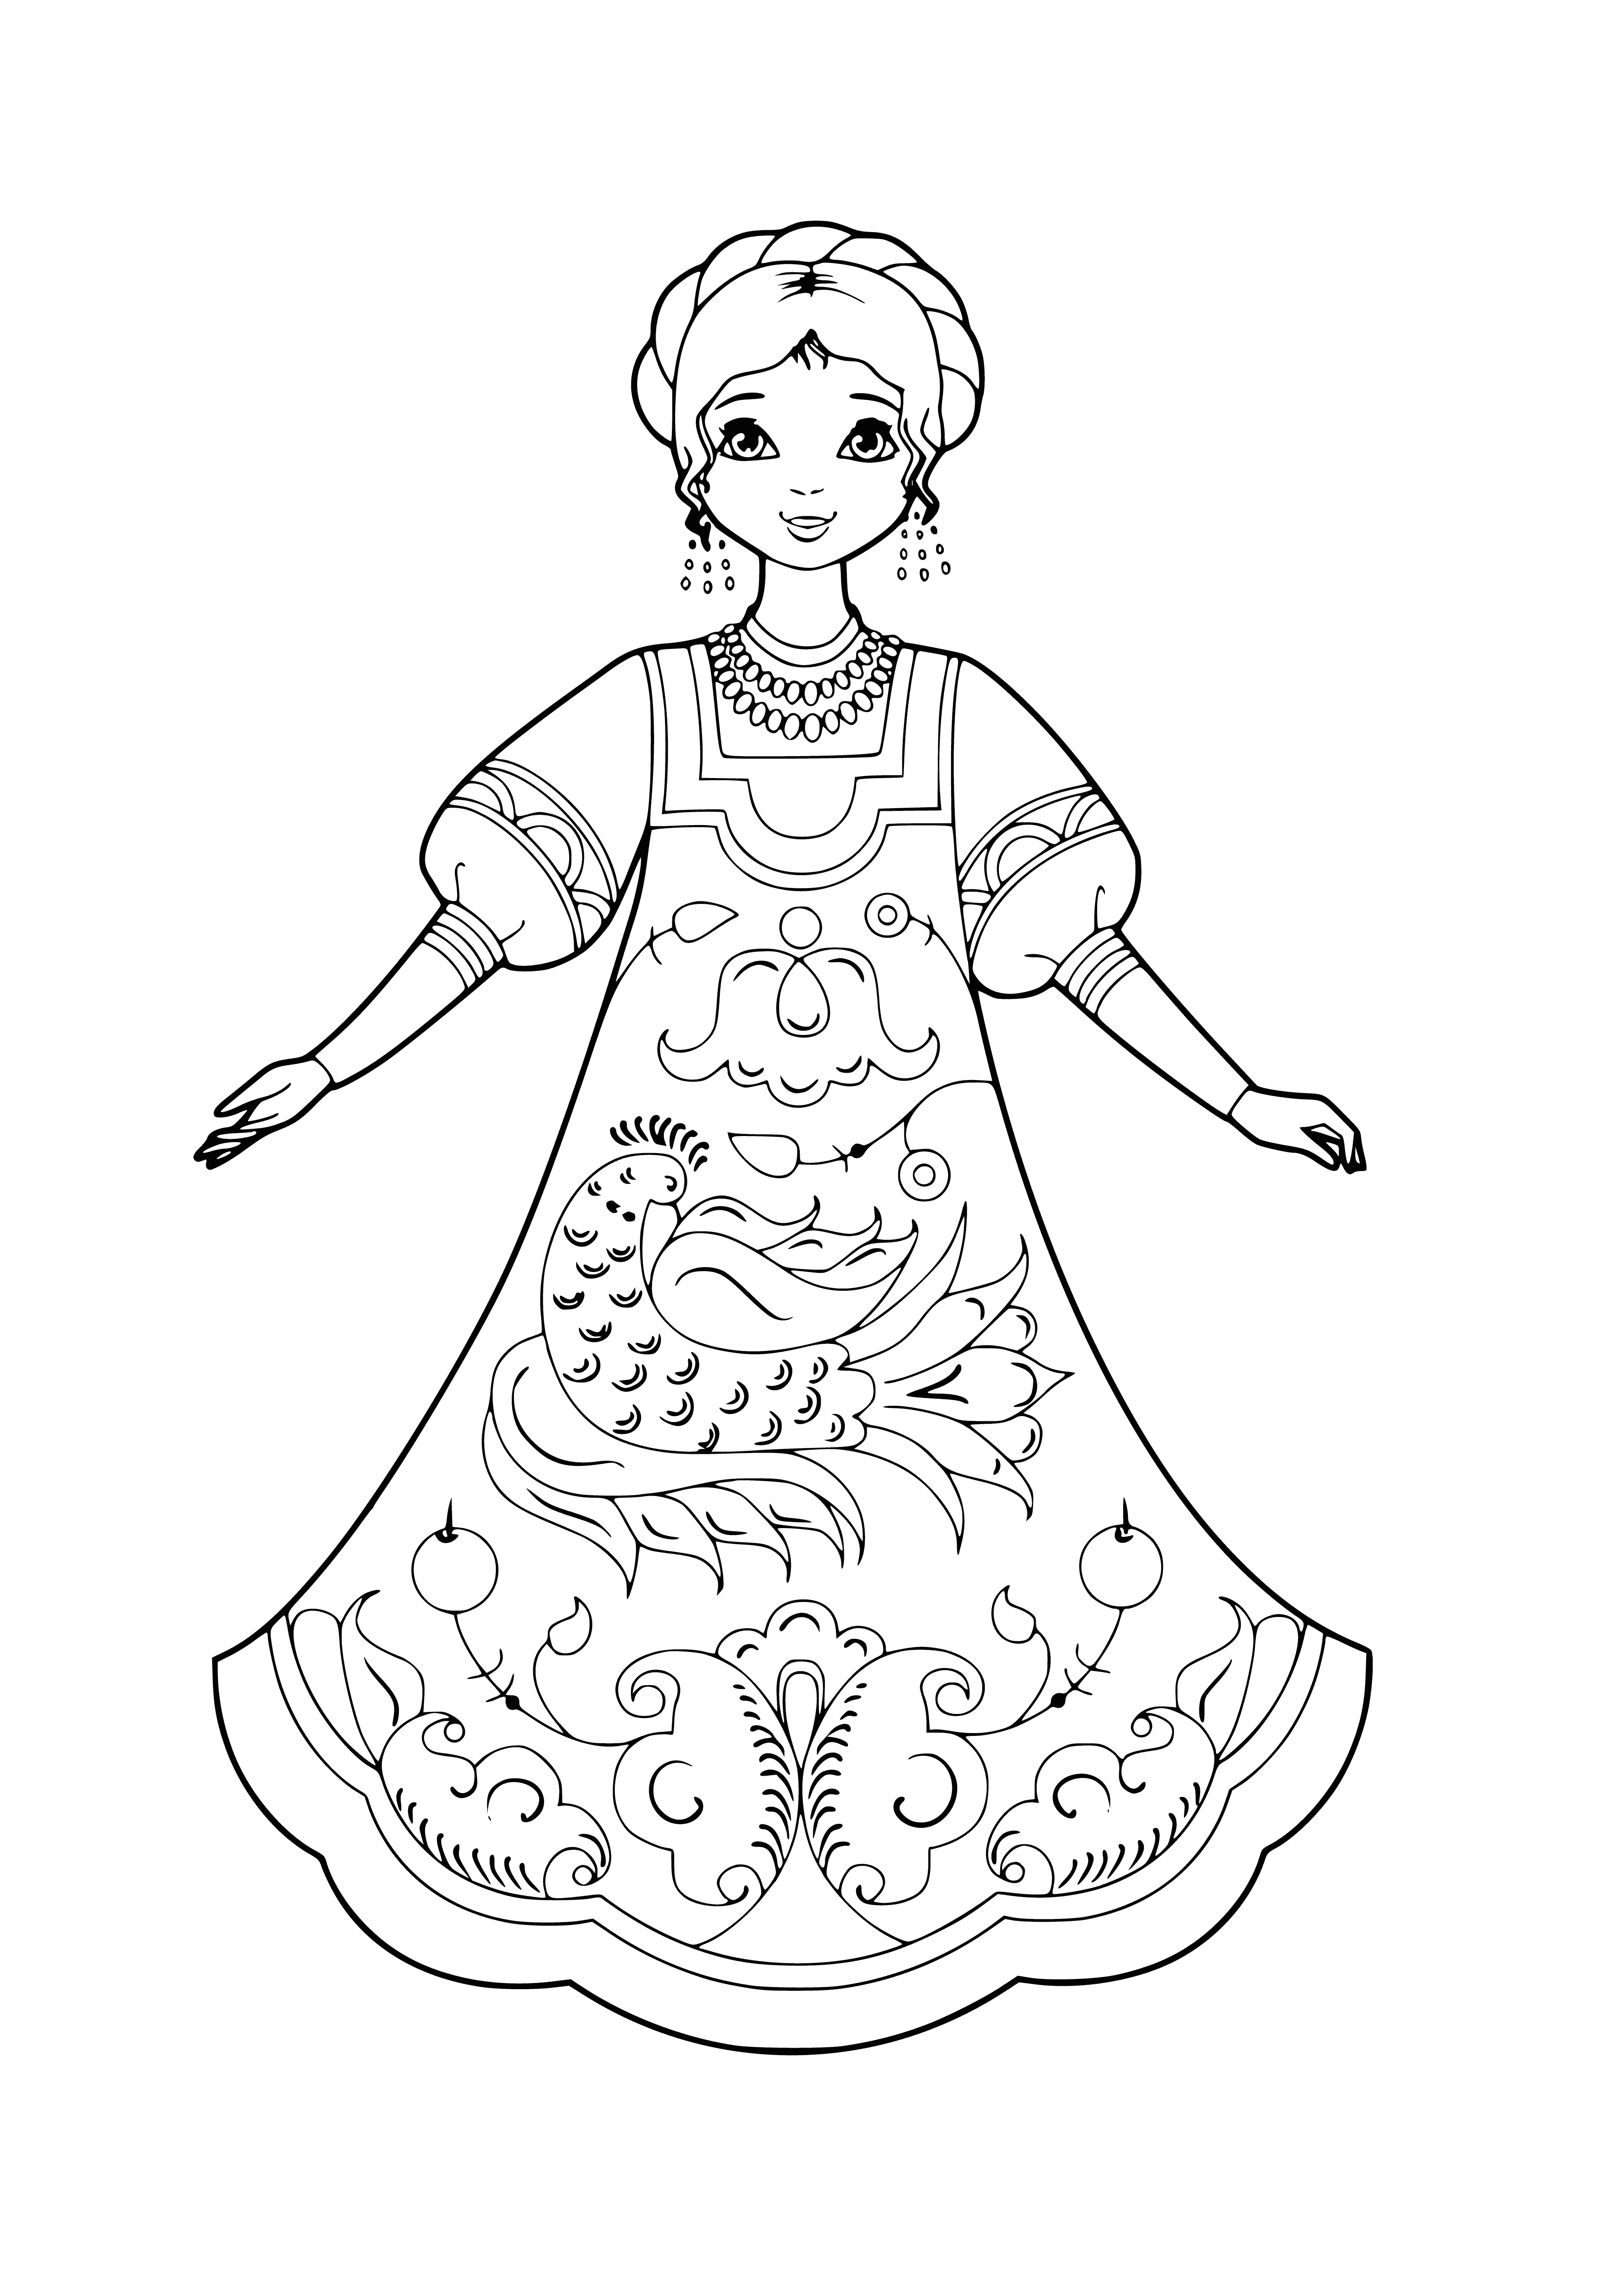 coloring page: A stern young woman in a colorful Russian dress with intricate designs and a headscarf pulling her hair in a tight bun.